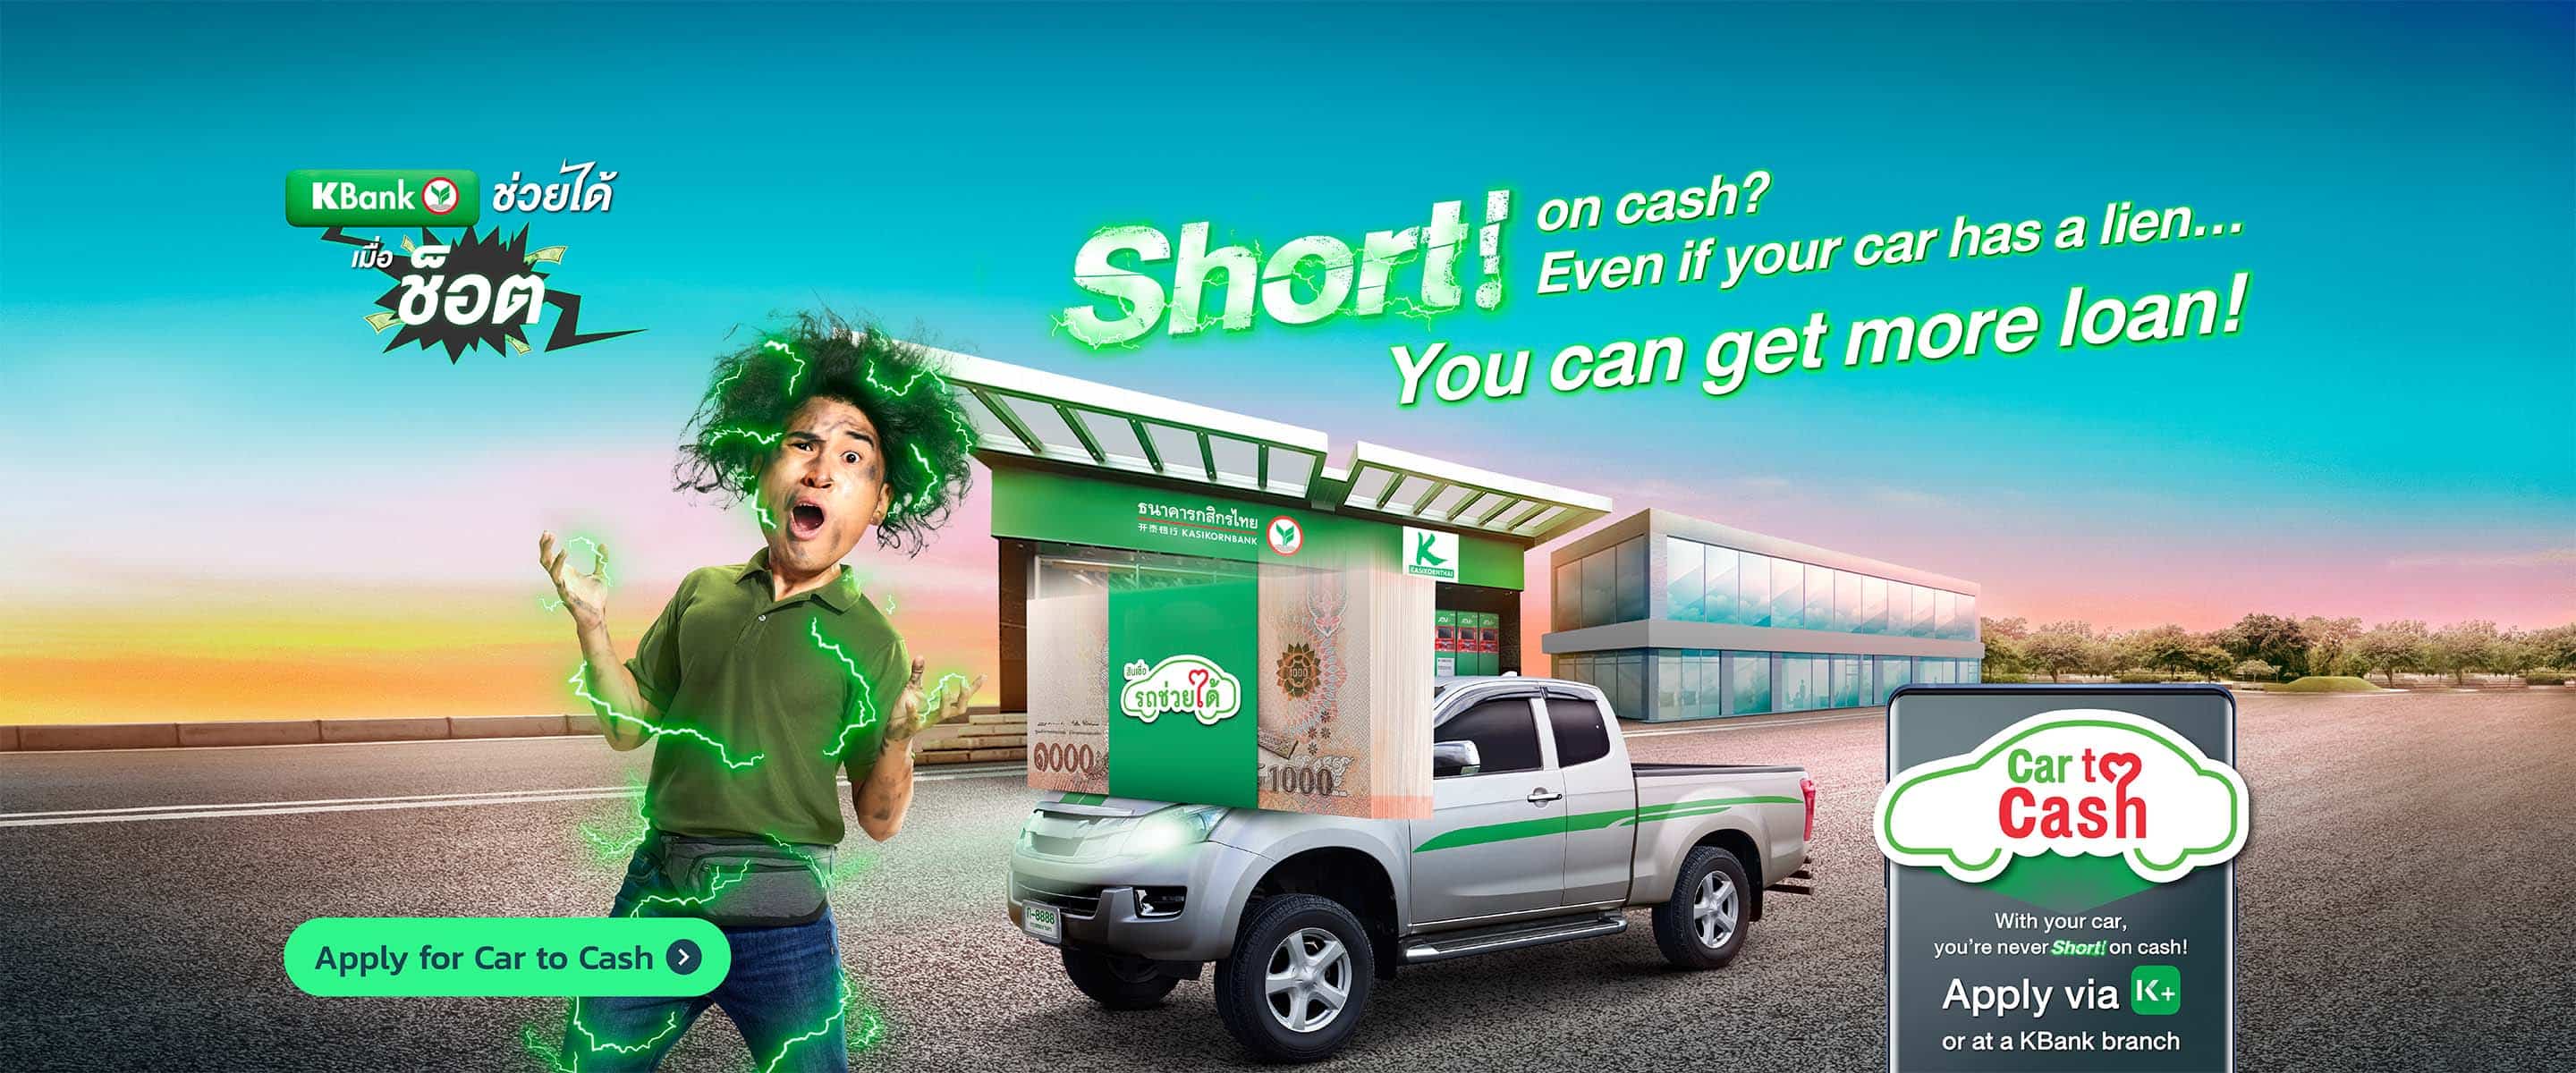 Car to Cash Short on cash? Even if your car has a lien You can get more loan